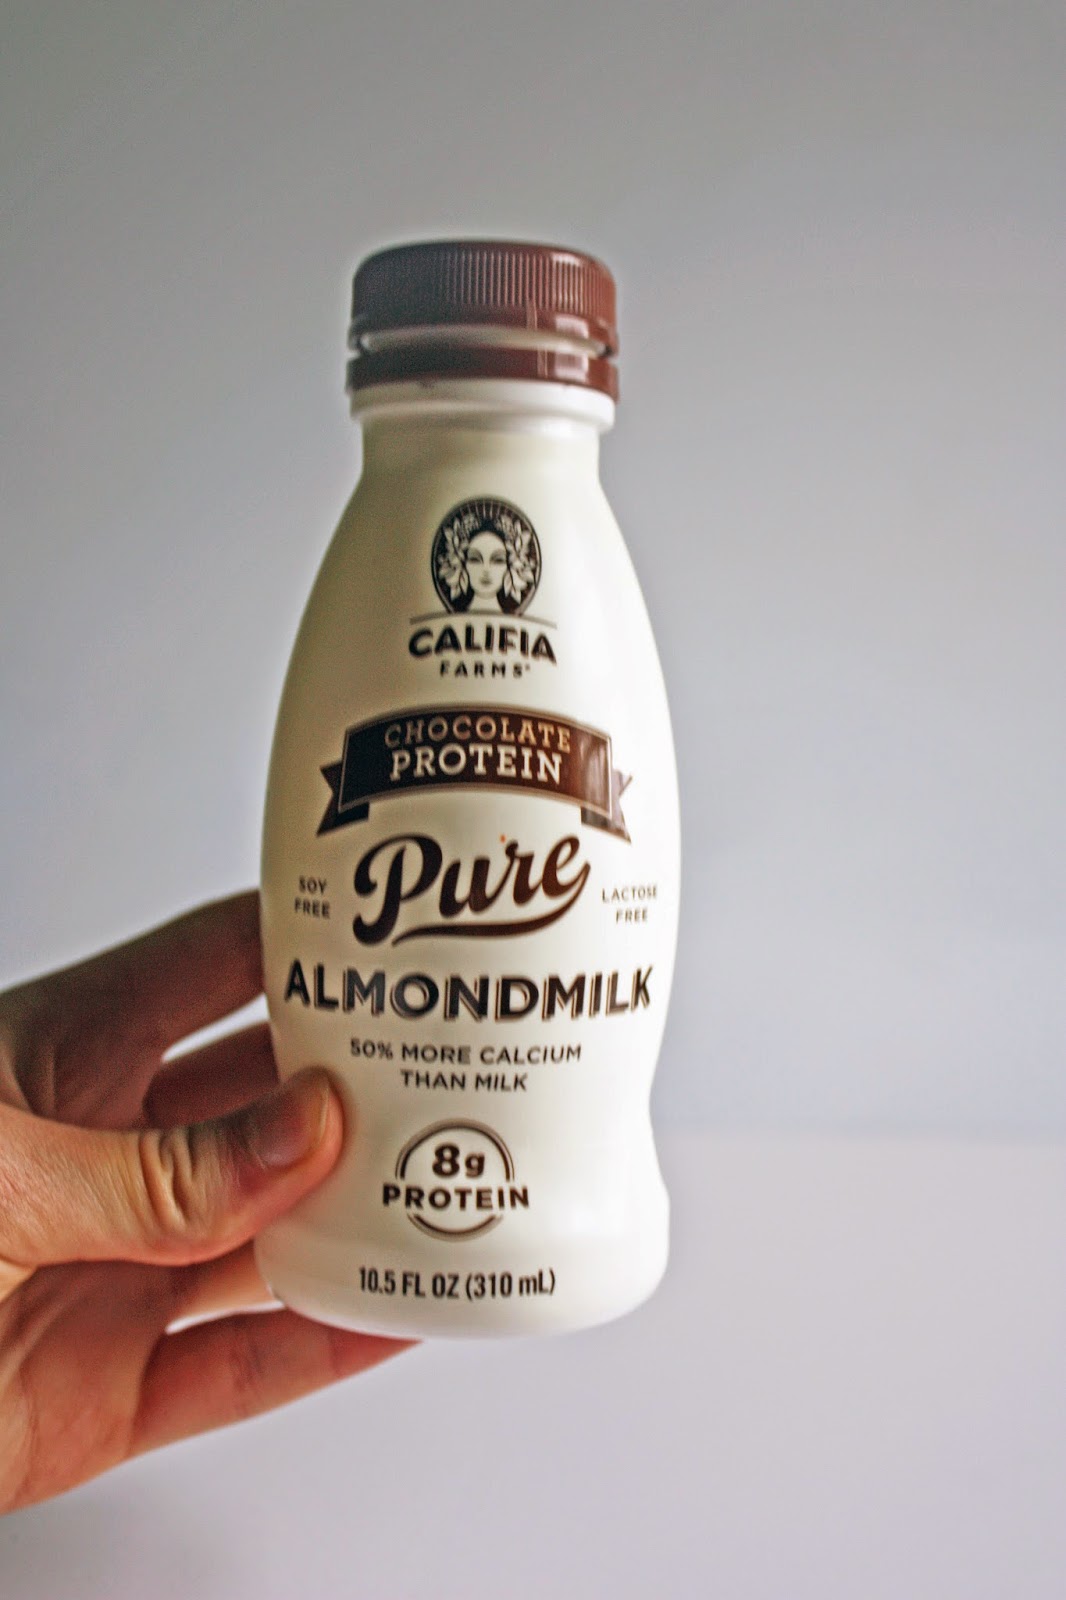 Califia farms chocolate protein almond milk is not vegan but why